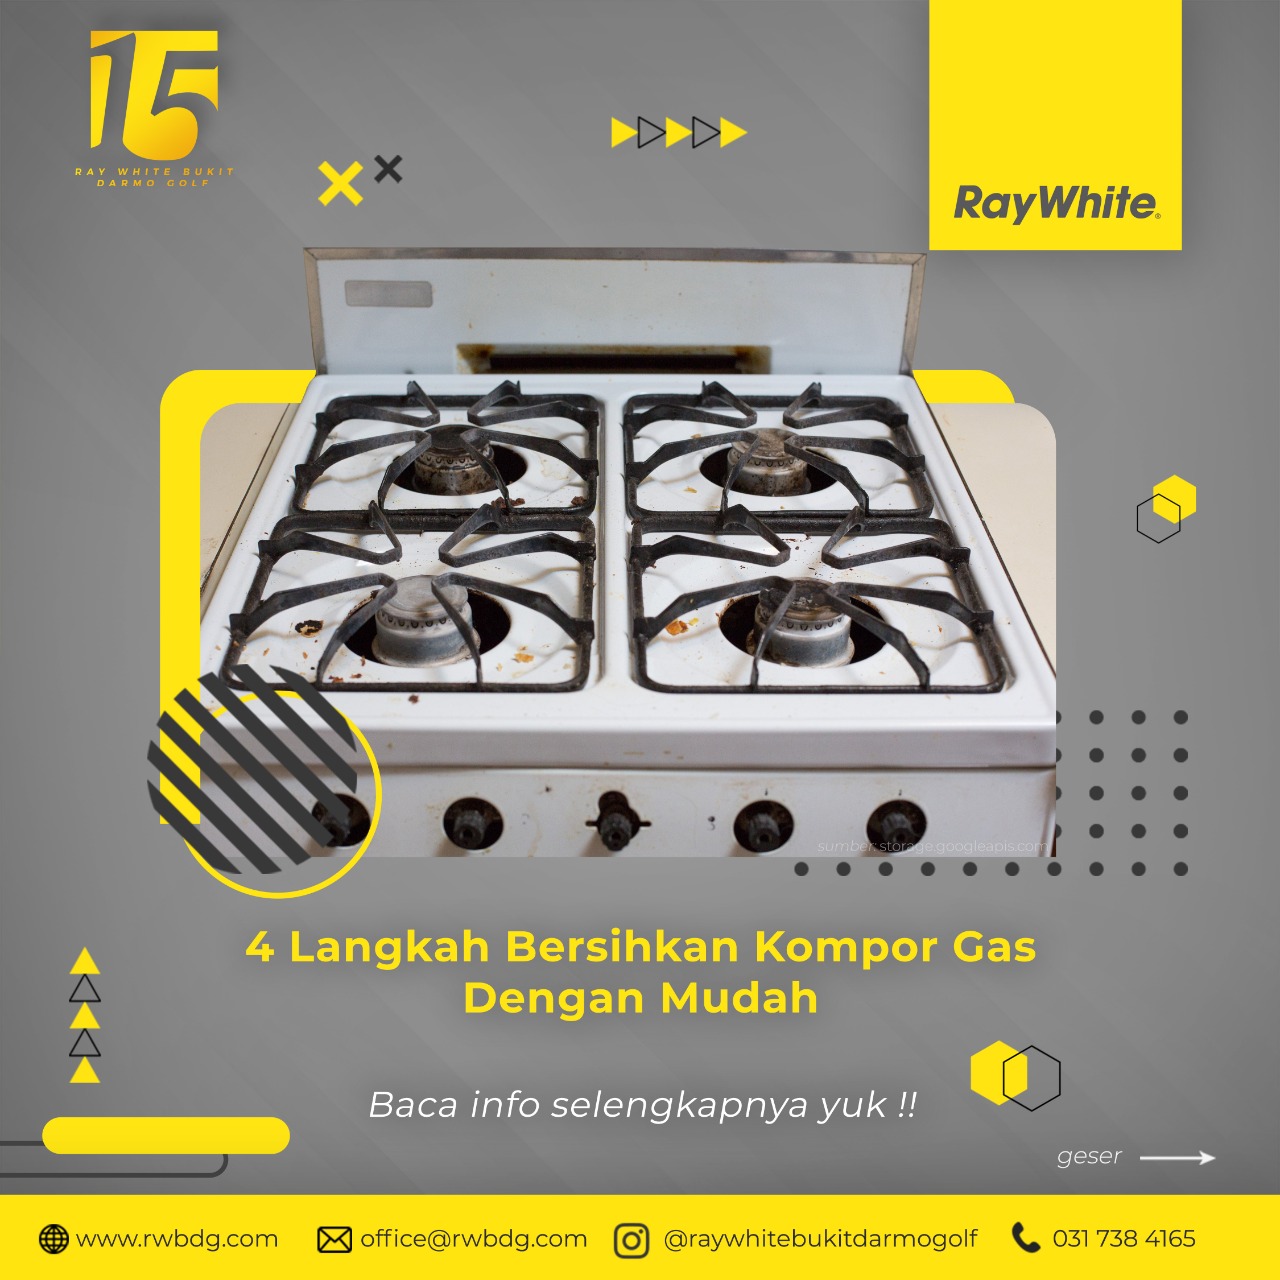 4 Steps To Clean Your Gas Stove Easily